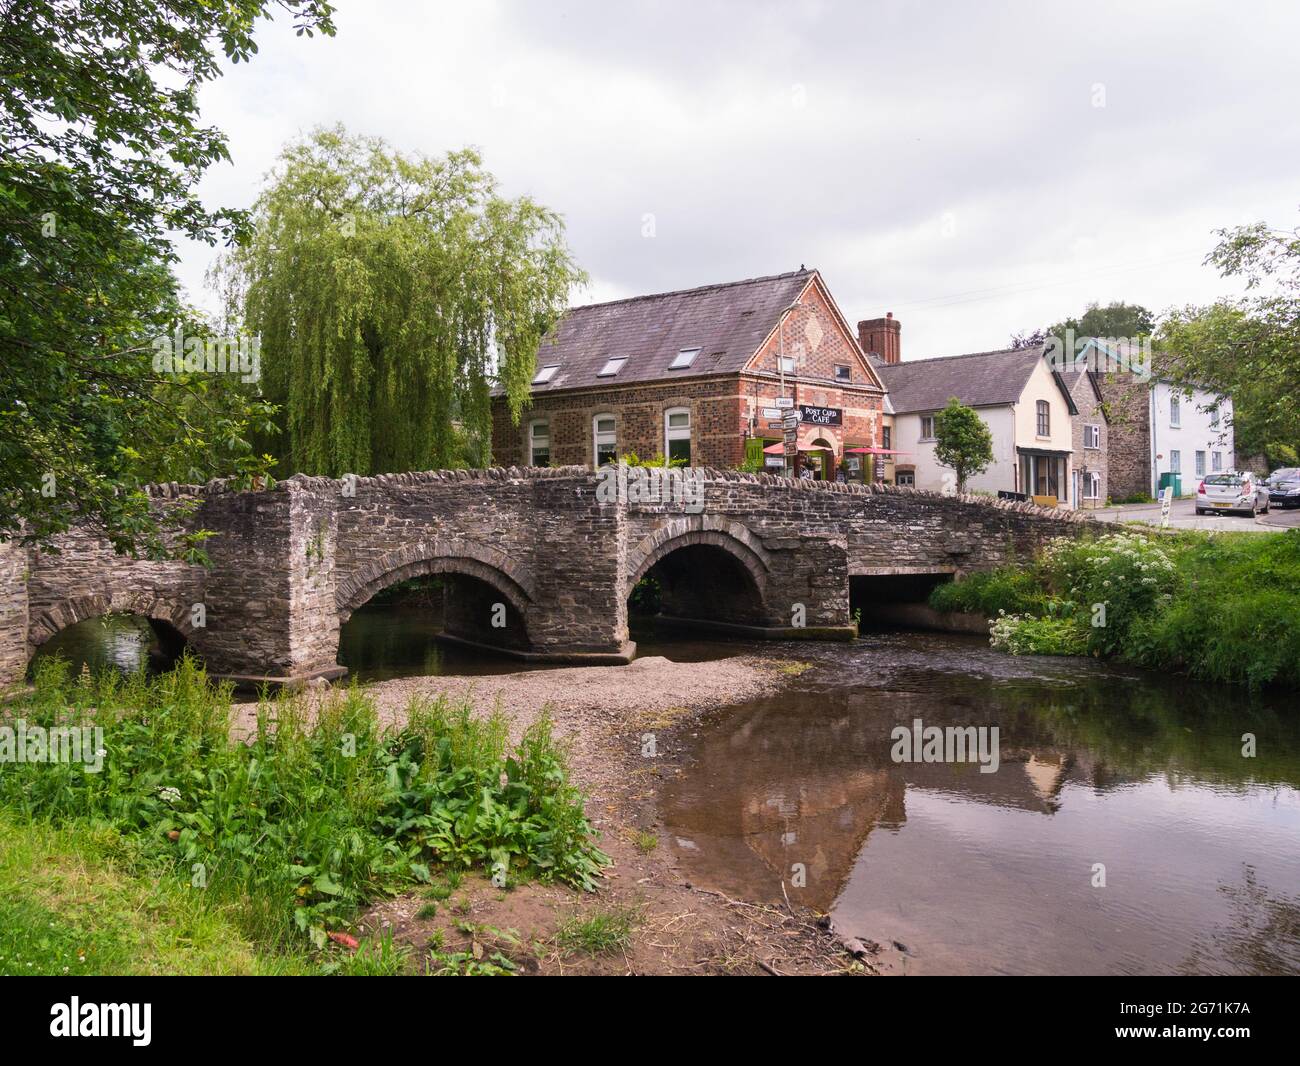 14thc packhorse Clun Bridge over the River Clun in Clun small village with popular Post Card cafe  in Shropshire Hills Area of Outstanding Natural Bea Stock Photo